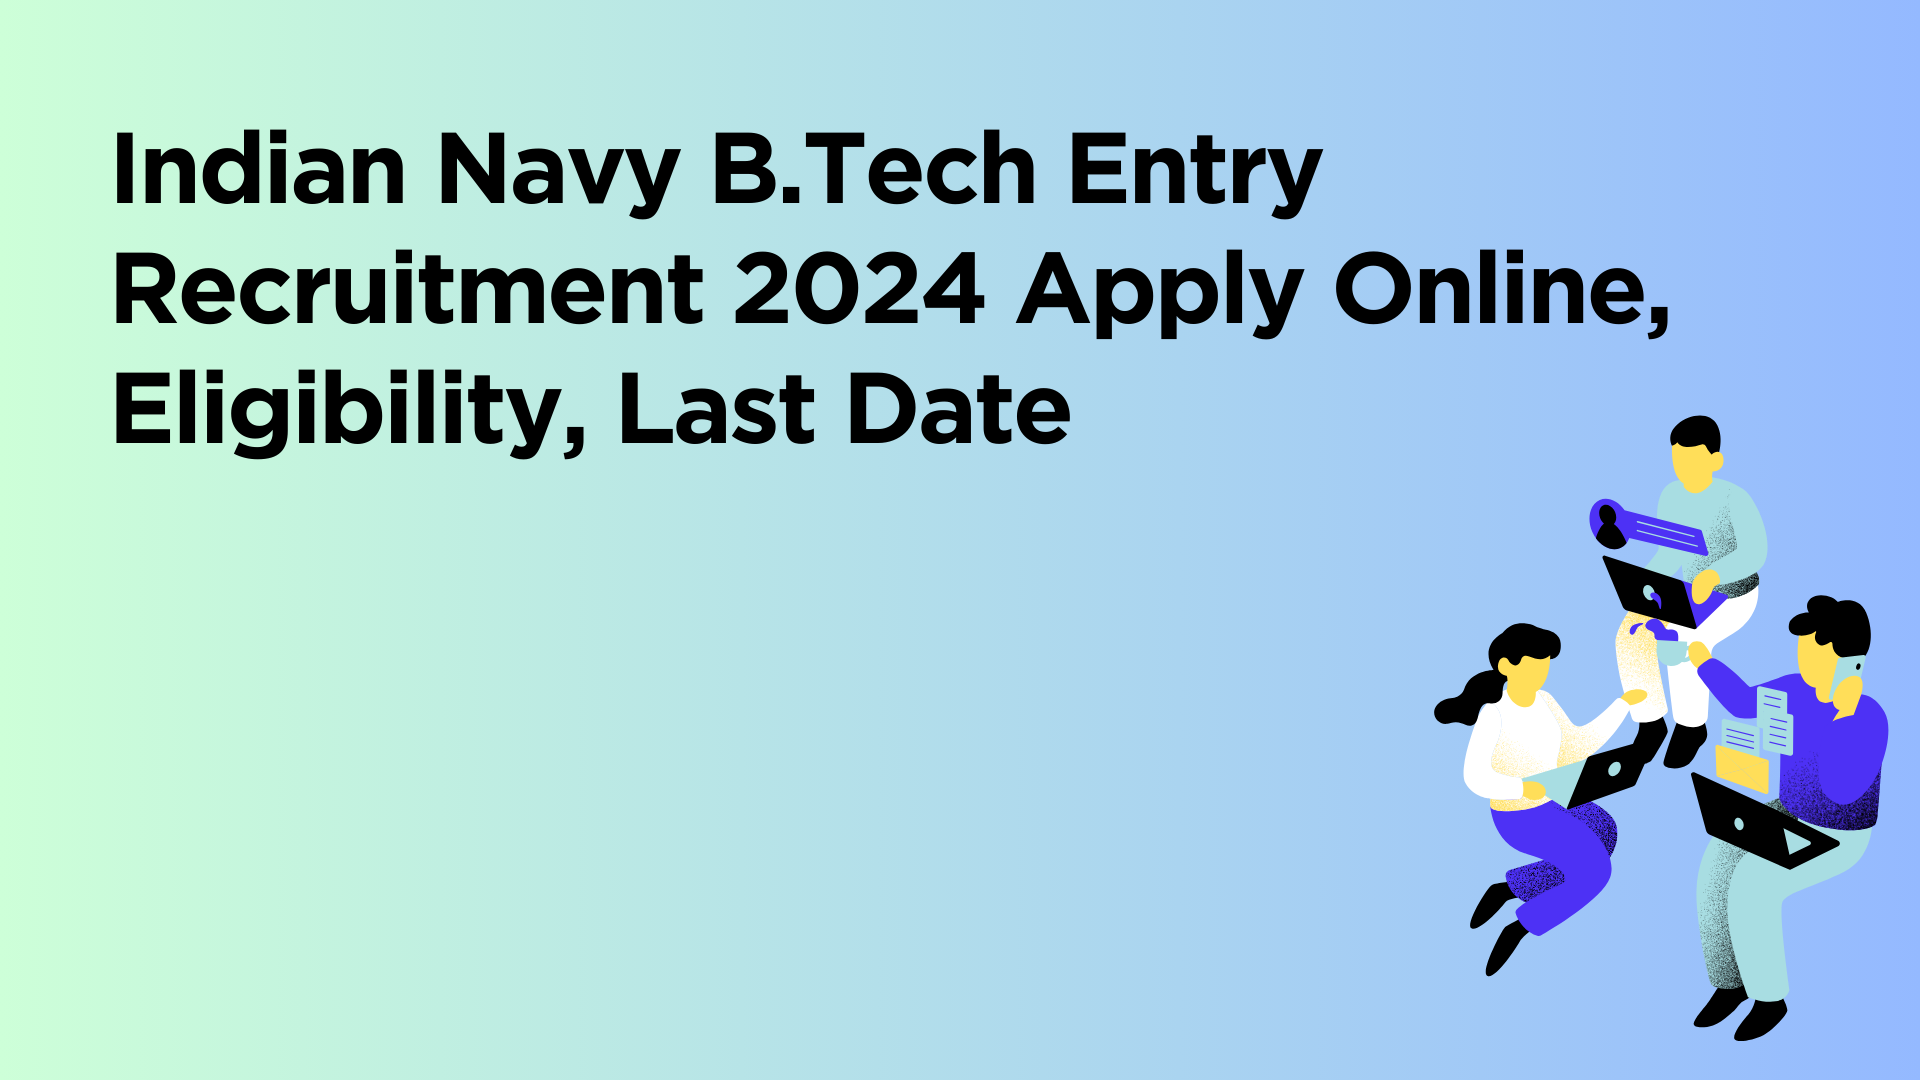 Indian Navy B.Tech Entry Recruitment Apply Online Eligibility Last Date